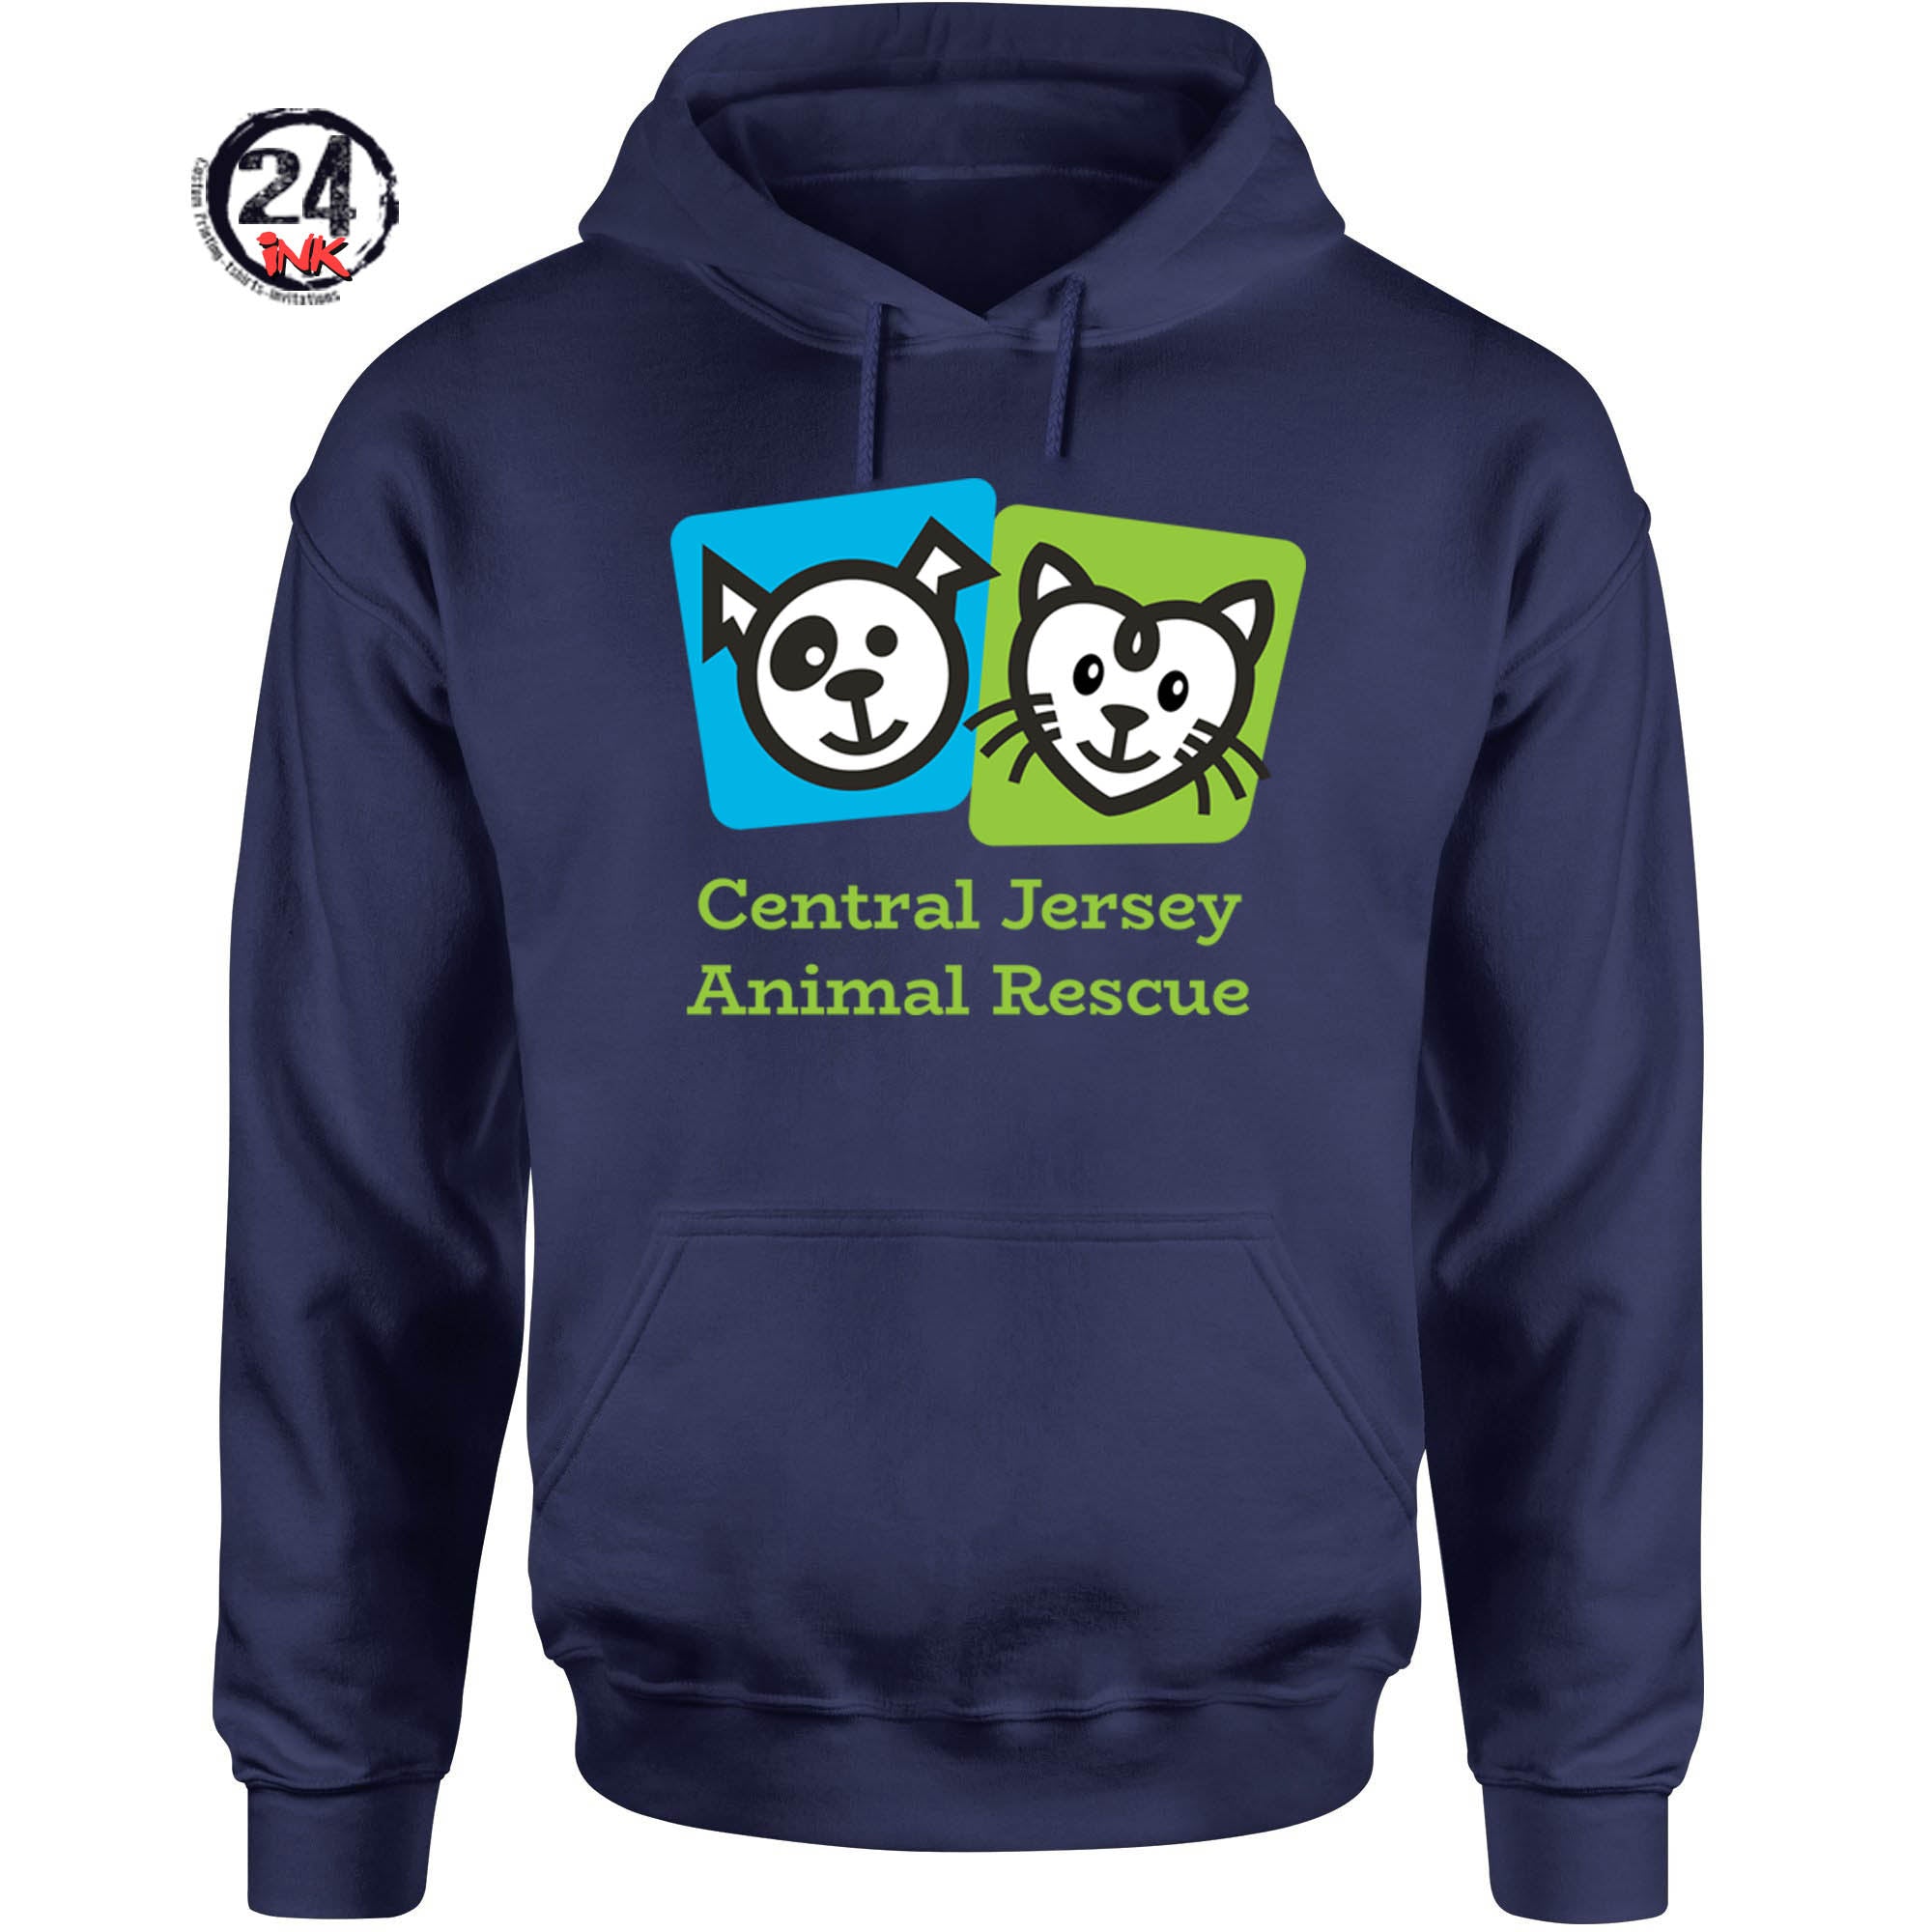 Central Jersey Animal Rescue